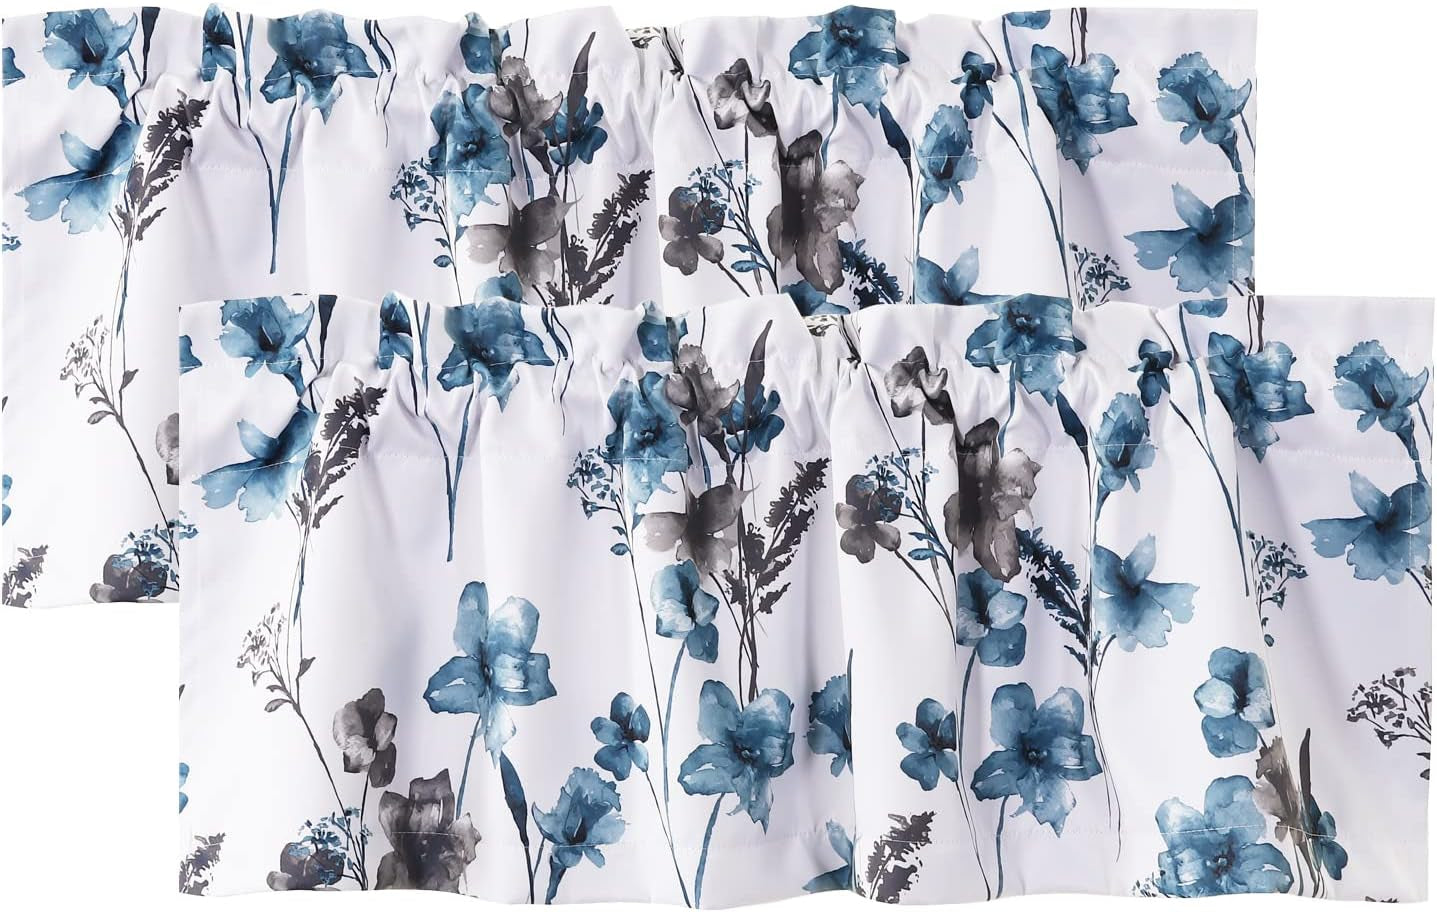 H.VERSAILTEX 100% Blackout Curtains for Bedroom Cattleya Floral Printed Drapes 84 Inches Long Leah Floral Pattern Full Light Blocking Drapes with Black Liner Rod Pocket 2 Panels, Navy/Taupe  H.VERSAILTEX Grey/Blue 52"W X 18"L 